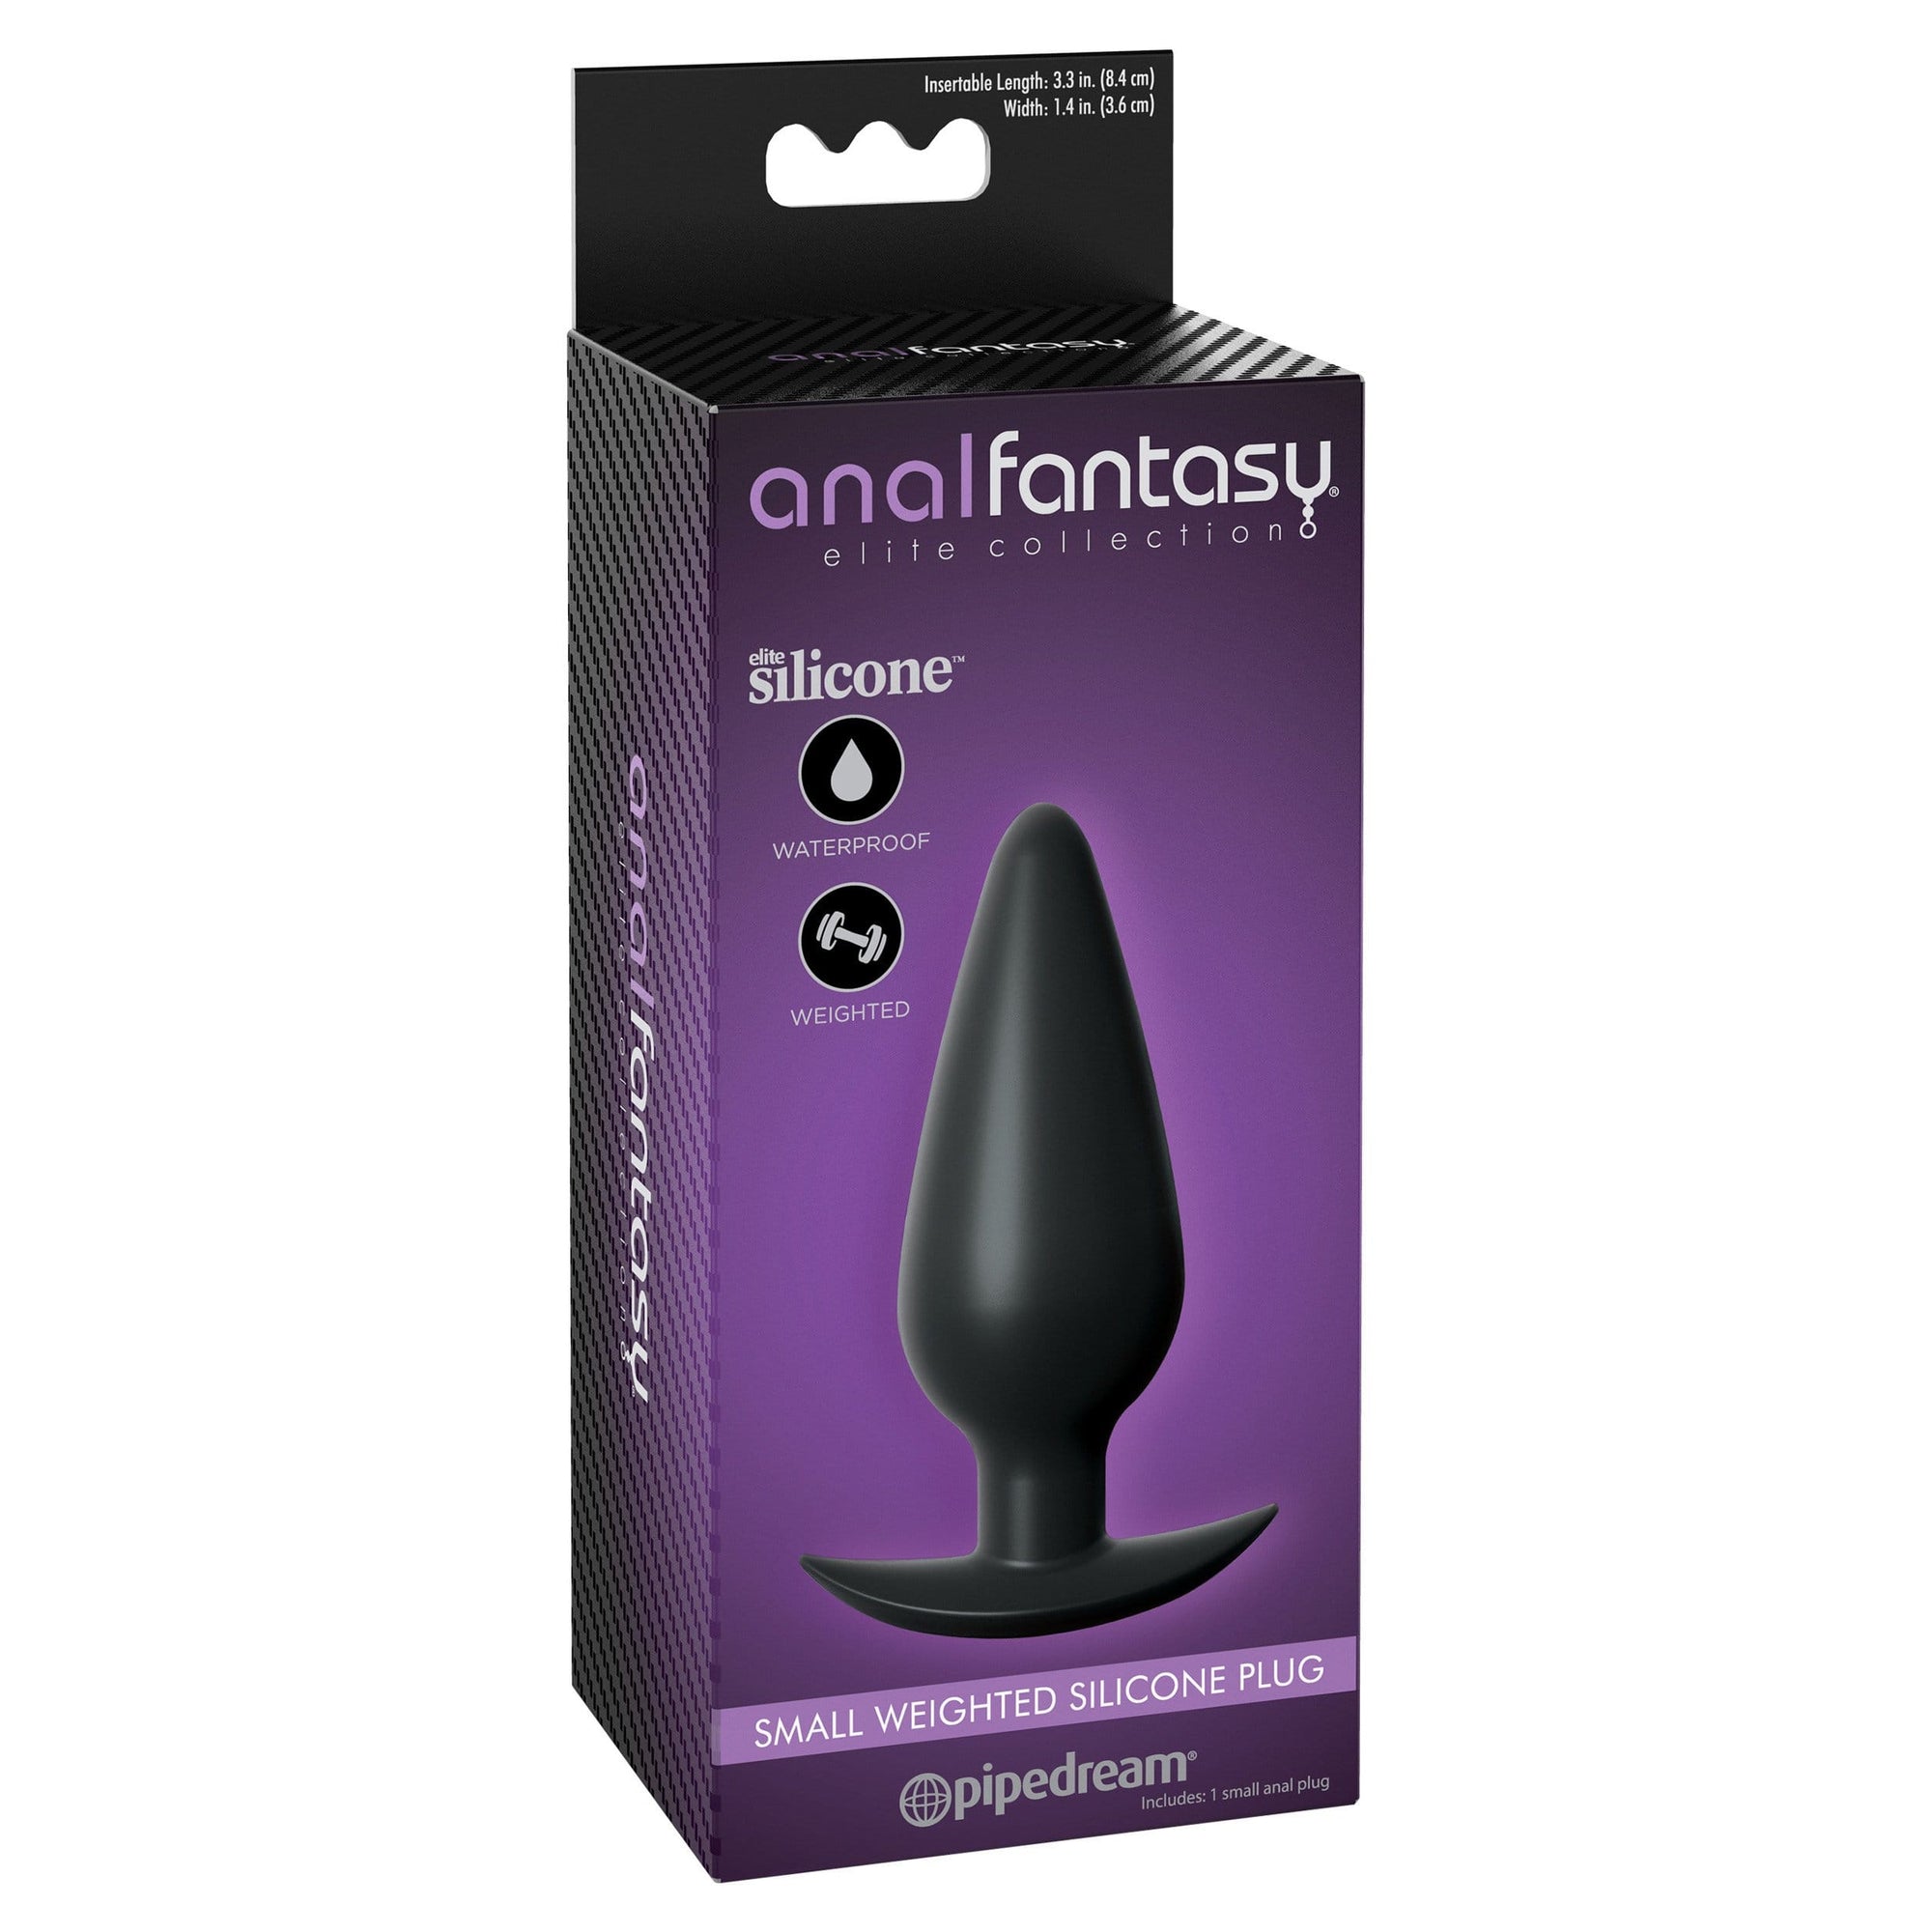 Pipedream - Anal Fantasy Elite Weighted Silicone Plug Small (Black) Anal Plug (Vibration) Rechargeable 324154094 CherryAffairs